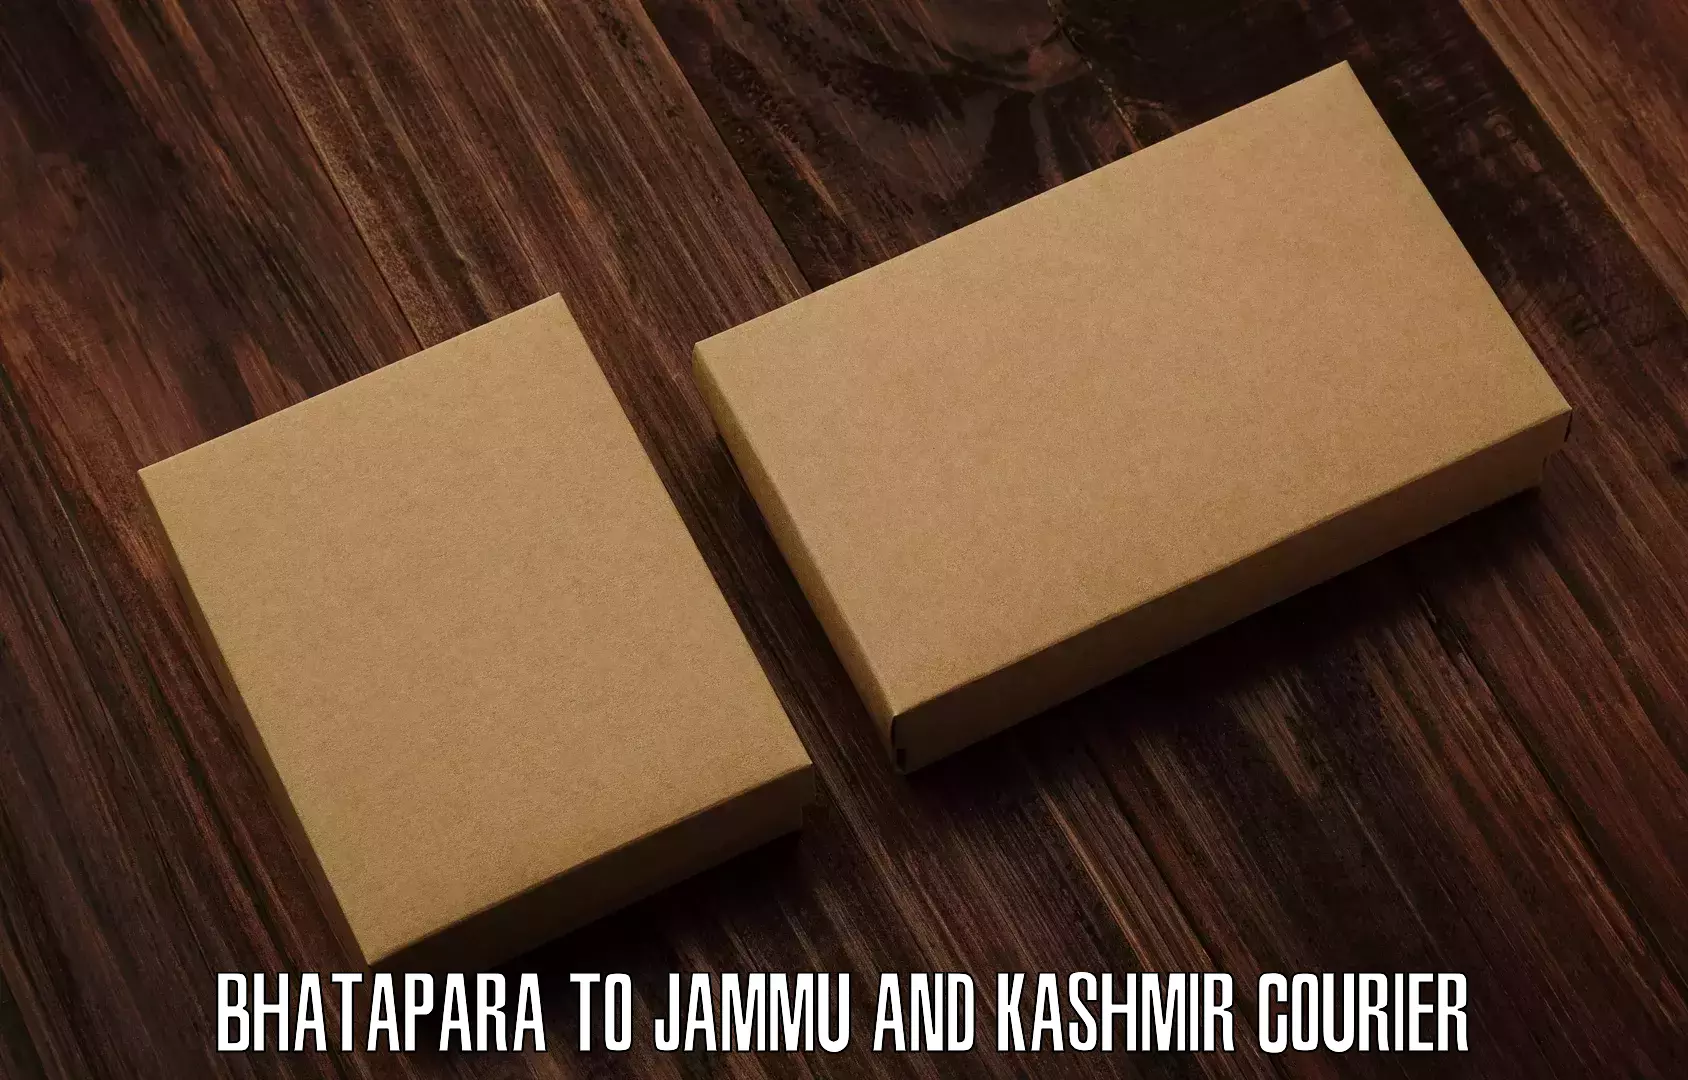 Cargo delivery service Bhatapara to Jammu and Kashmir